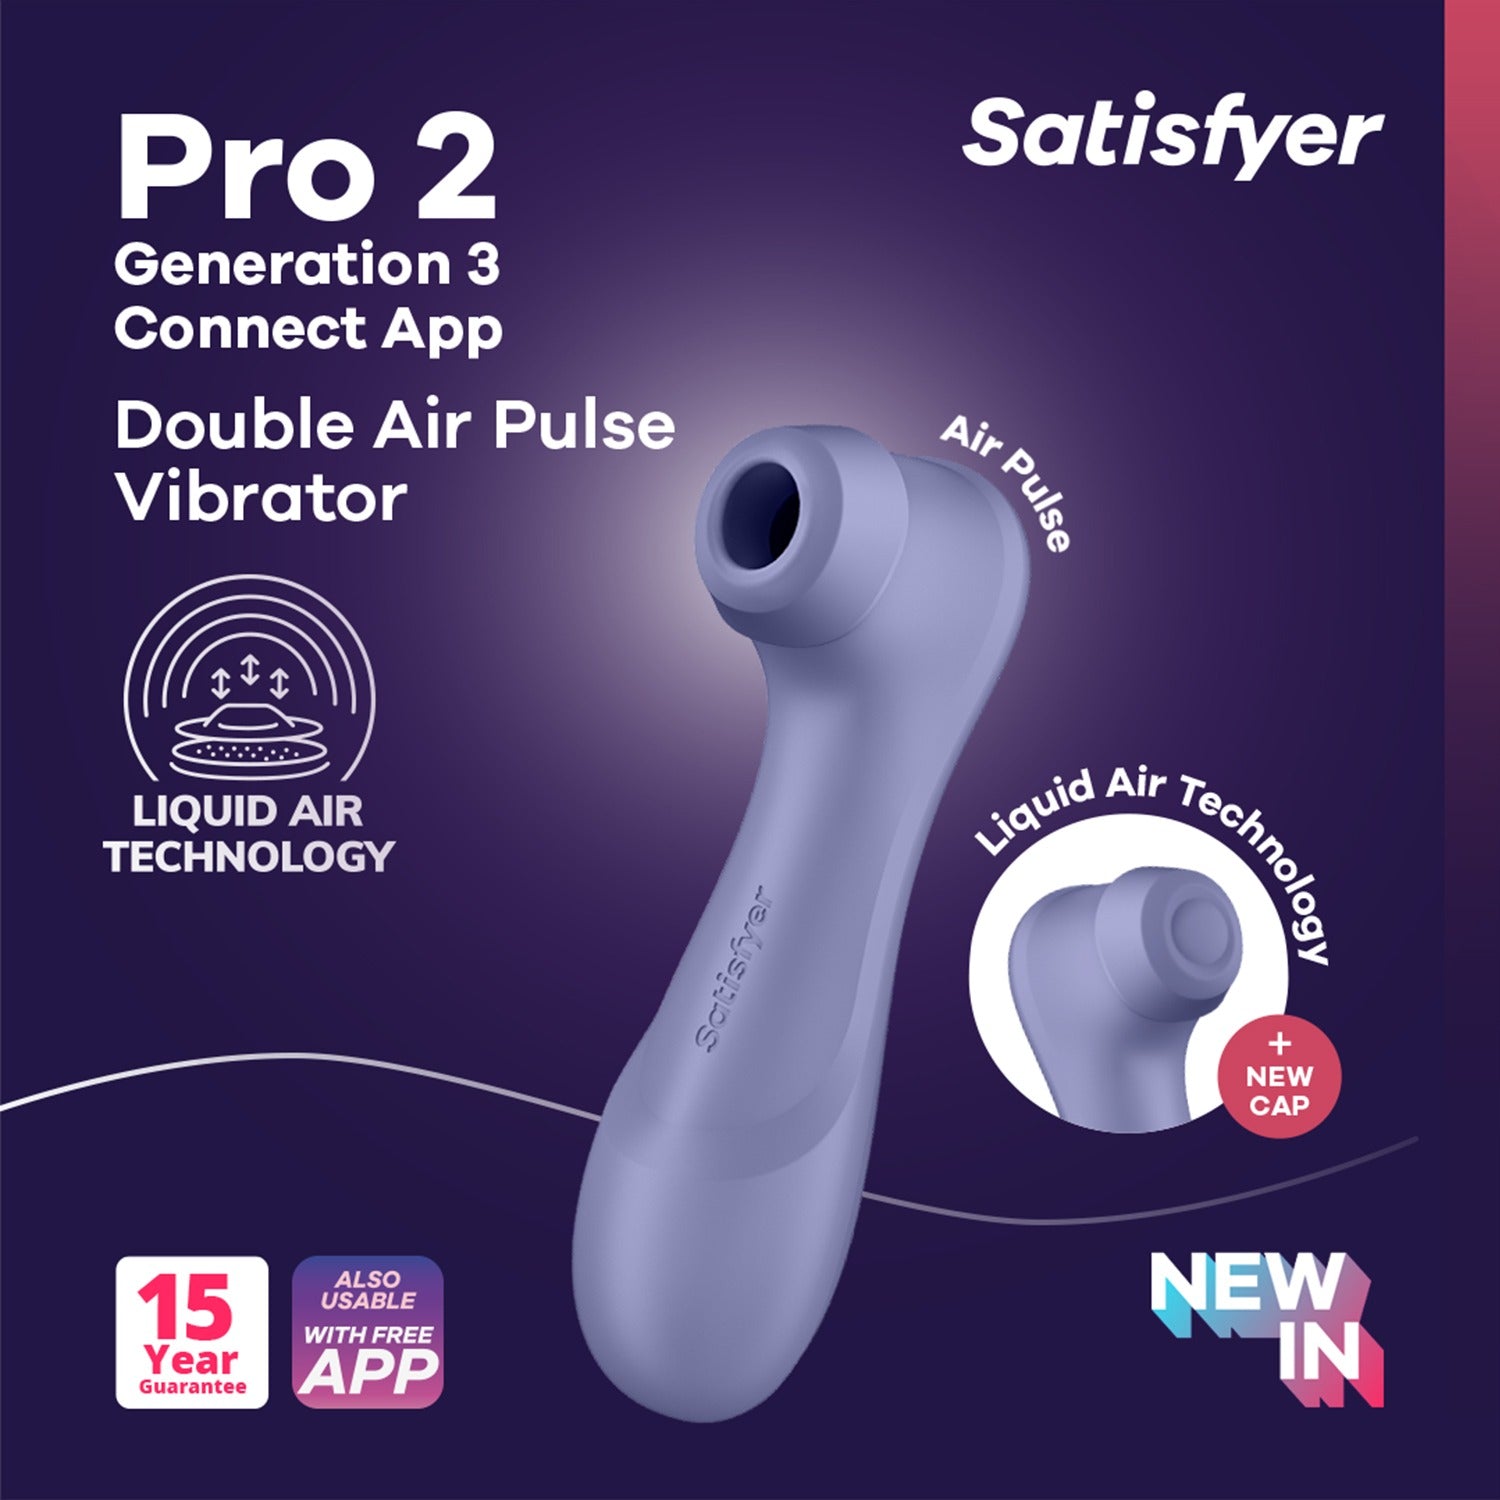 An image of the Satisfyer Pro 2 Generation 3 Double Air Pulse Vibrator with Air Pulse written above, Satisfyer logo top right, Product name: Pro 2 Generation 3 Connect App Double Air Pulse Vibrator, below are feature icons for Liquid Air technology; 15 Year Guarantee; Also usable with free app, a separate circled close-up image of the Liquid Air cap on the product's head "Liquid Air Technology + New Cap" printed around, and at the bottom left "New In" printed in the corner.